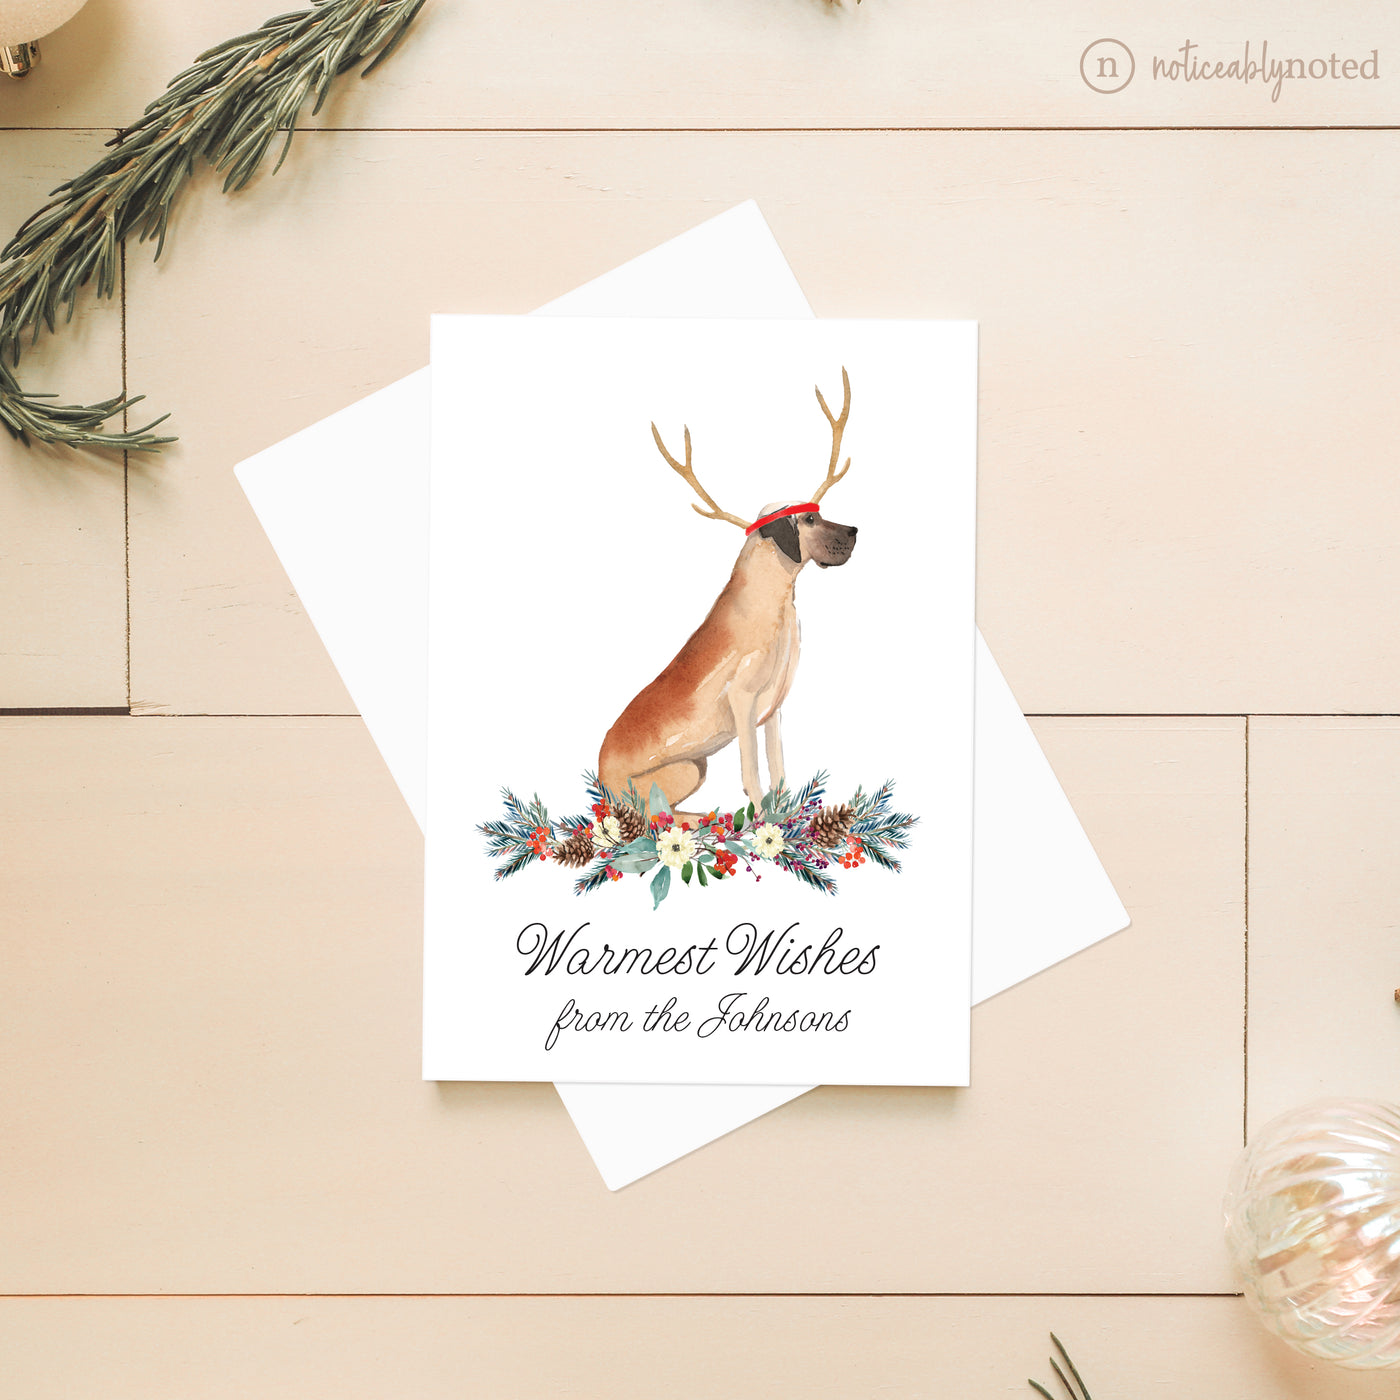 Great Dane Dog Christmas Cards | Noticeably Noted